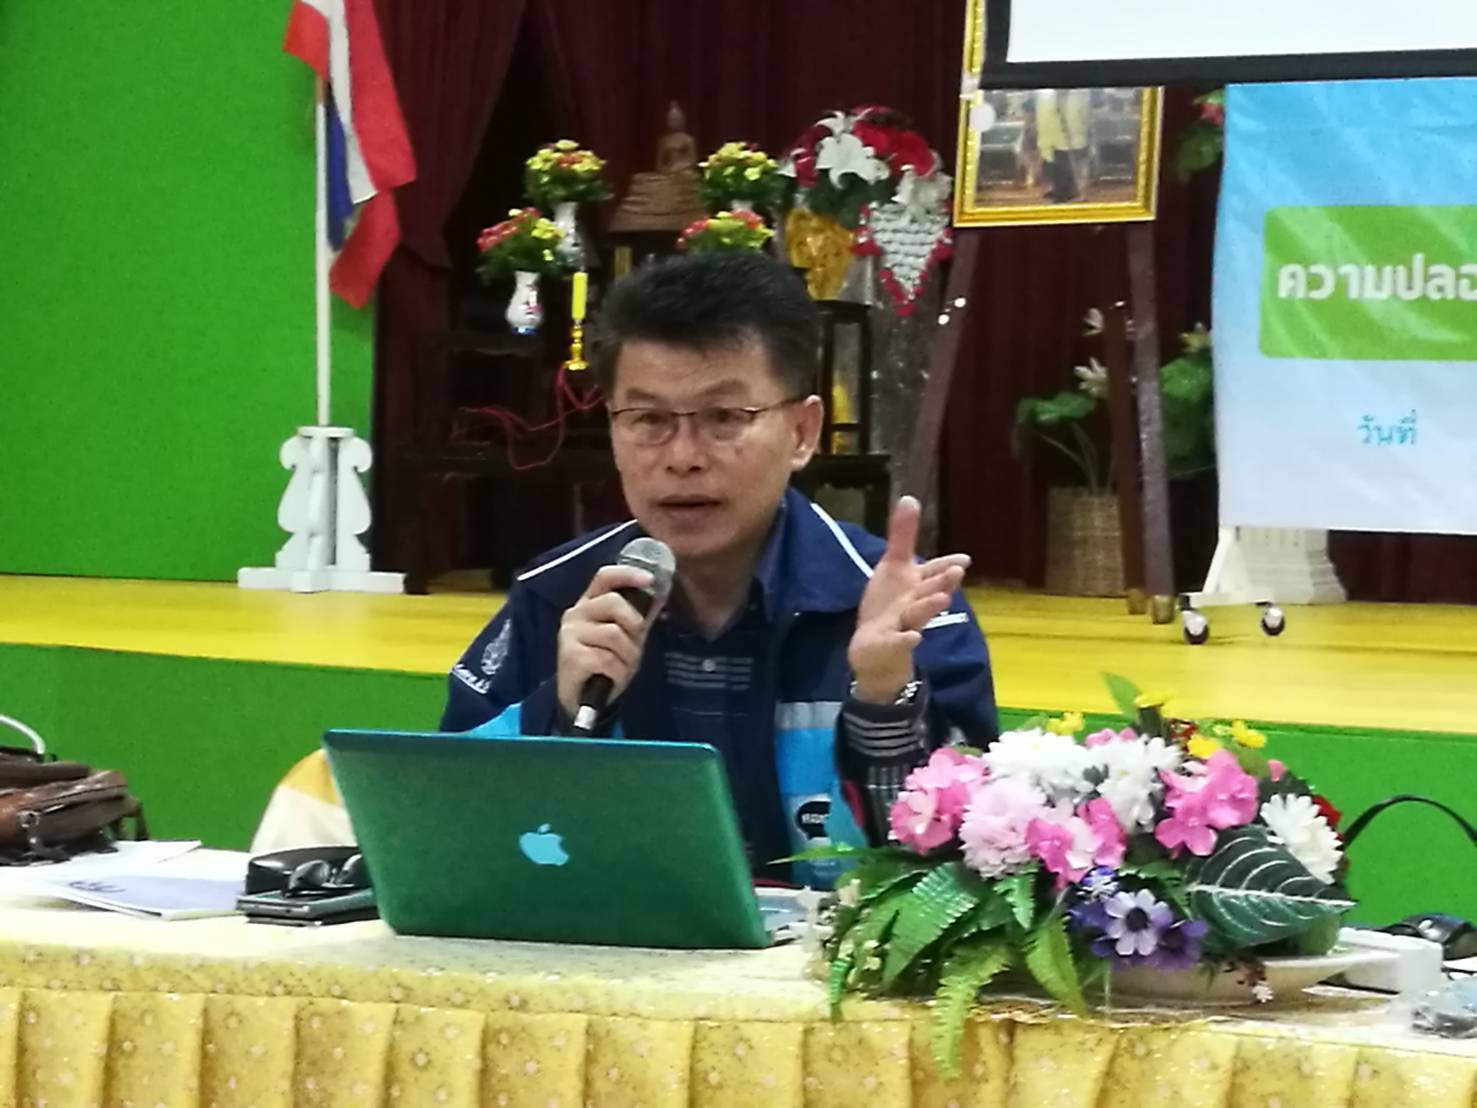 The city’s complaint center executive Chaiwat Klisanalom chairs a meet-up at Pattaya School No. 6 where he provided knowledge and advice on how to solve problems in local communities.